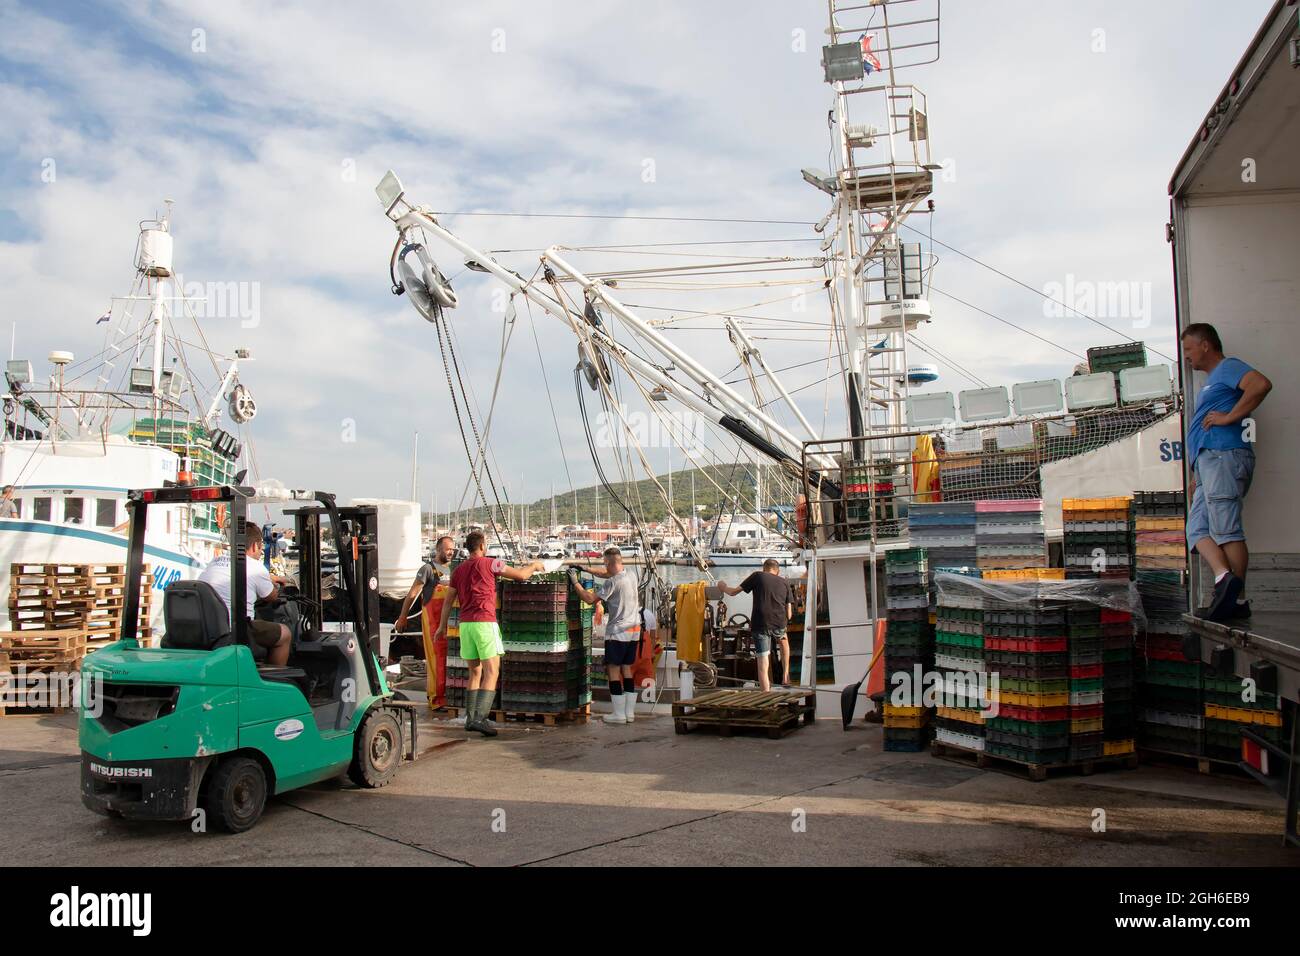 Tribunj, Croatia - August 4, 2021: Fishermen and dock workers loading fish containers and boxes in a truck using boat cranes and fork lift vehicle Stock Photo